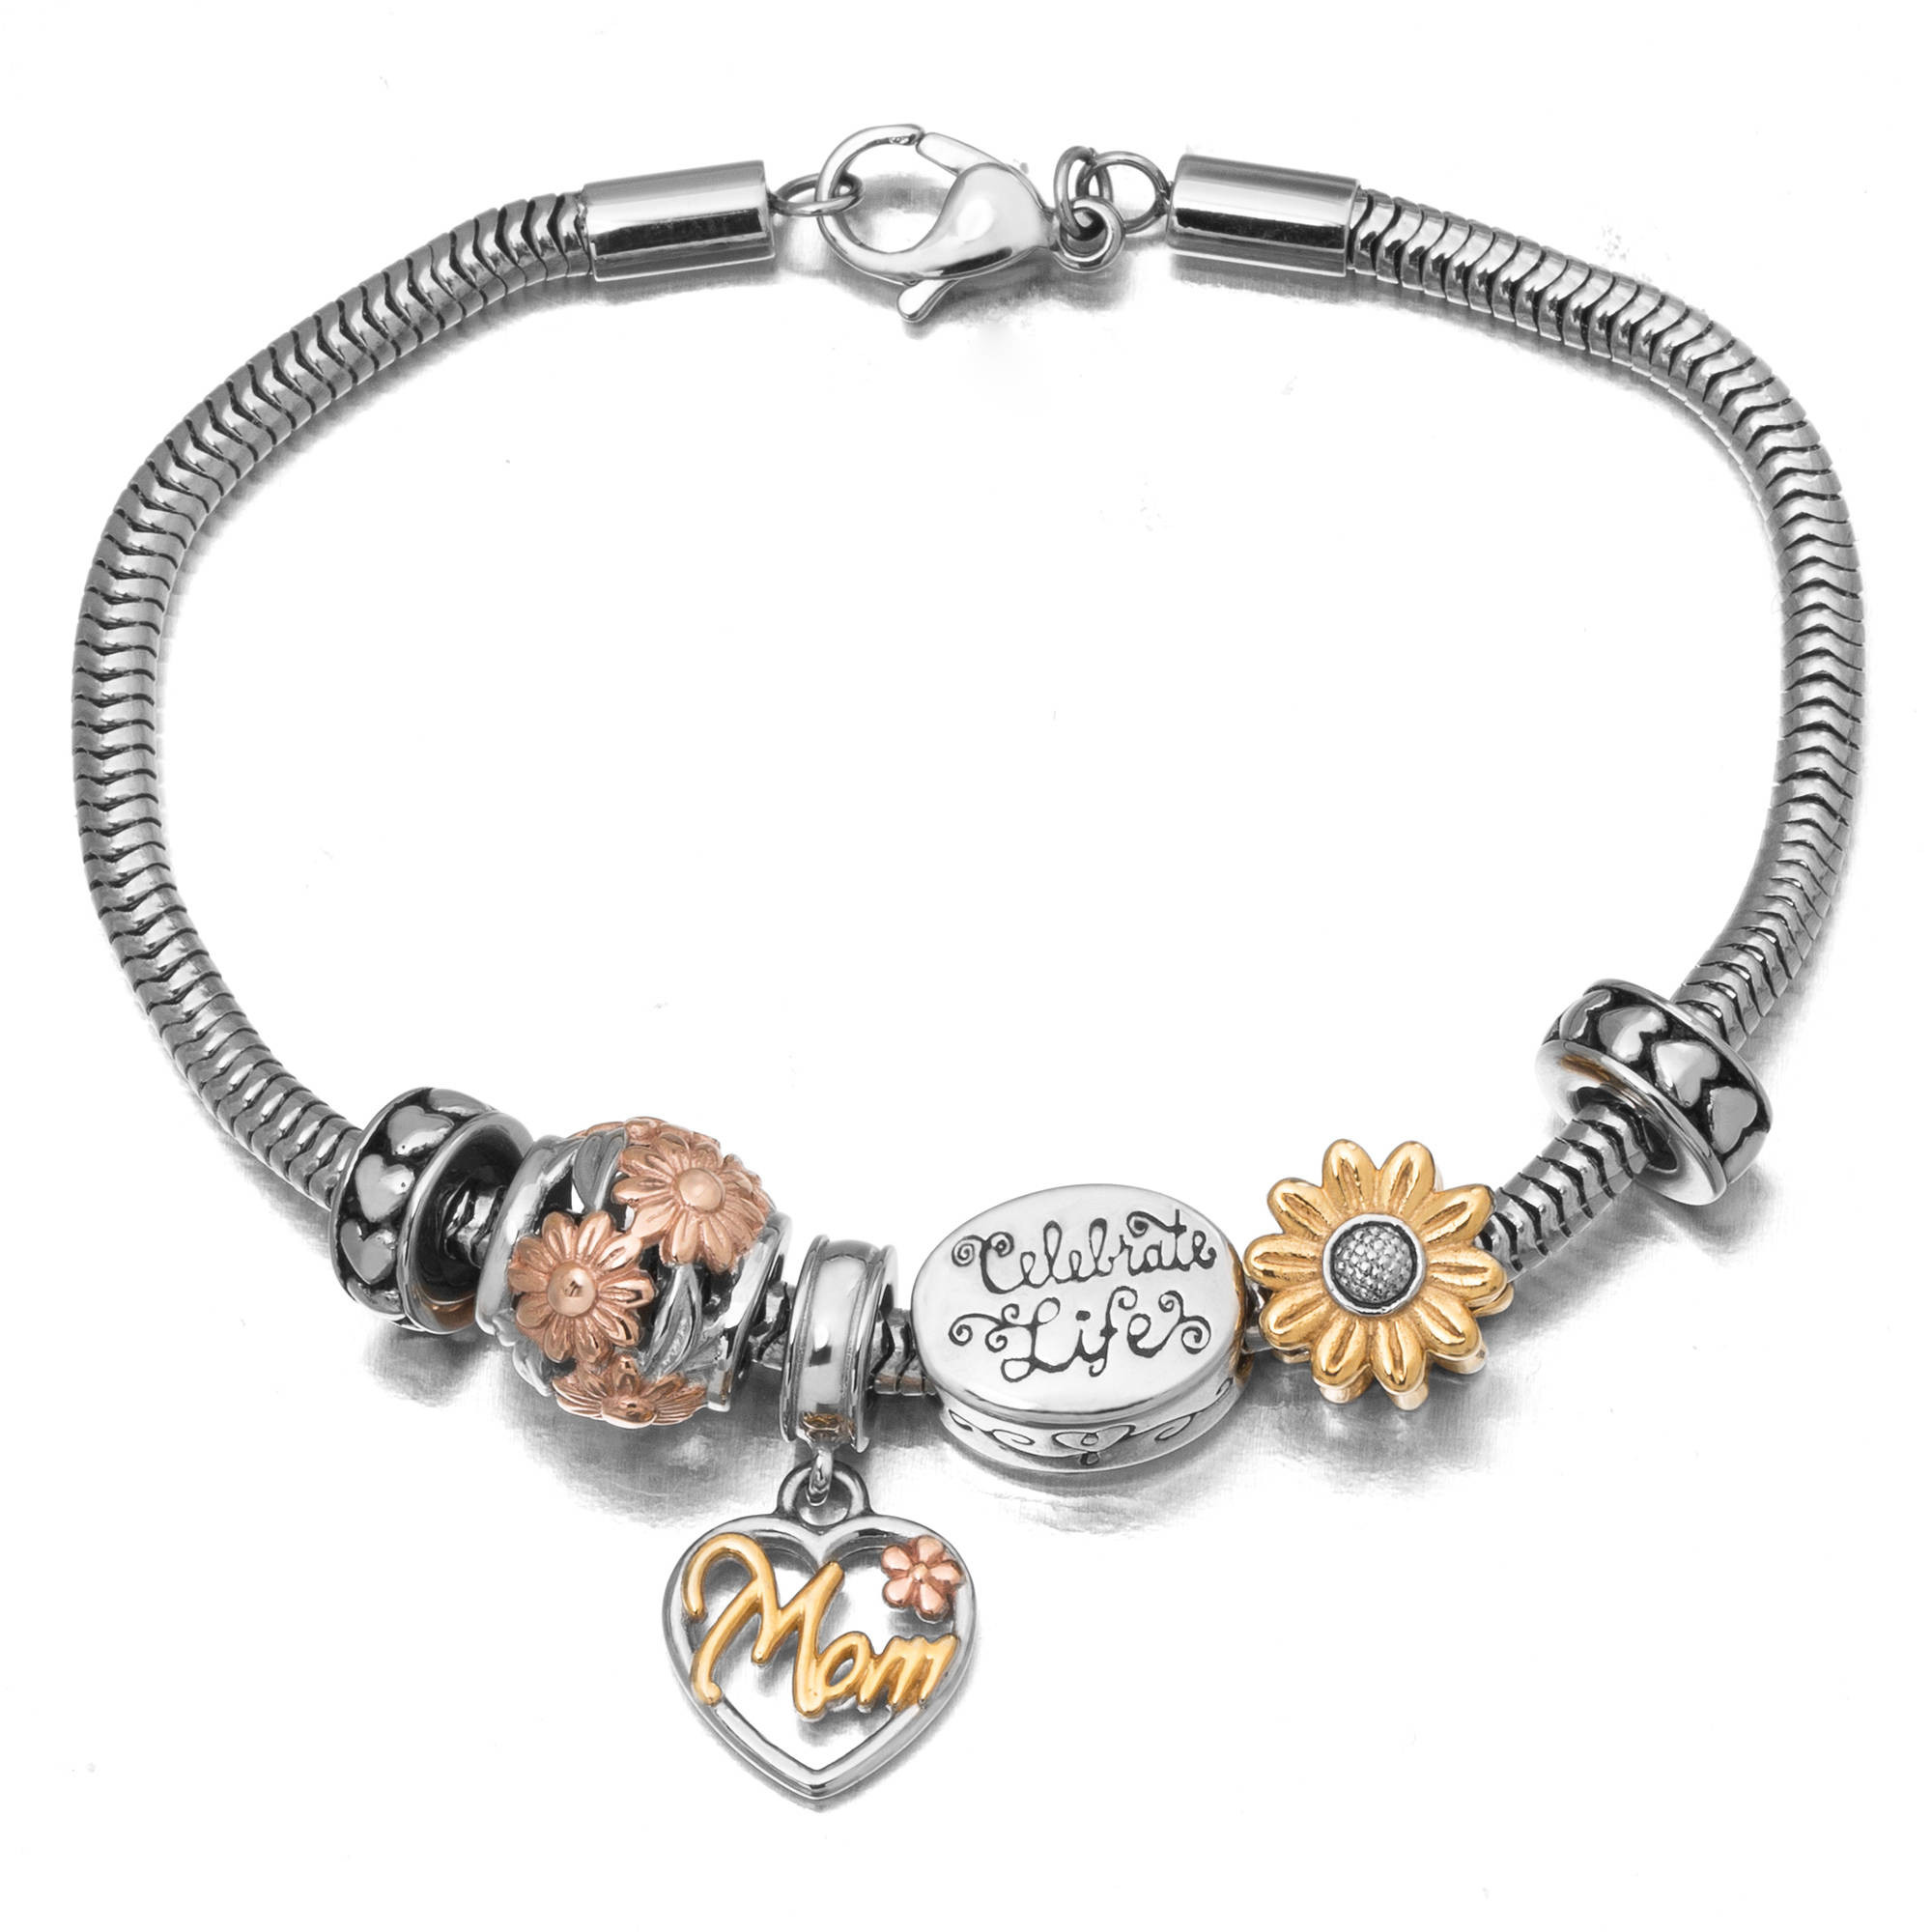 Hallmark Bracelet Charms
 Connections from Hallmark Stainless Steel Tri Color Mom